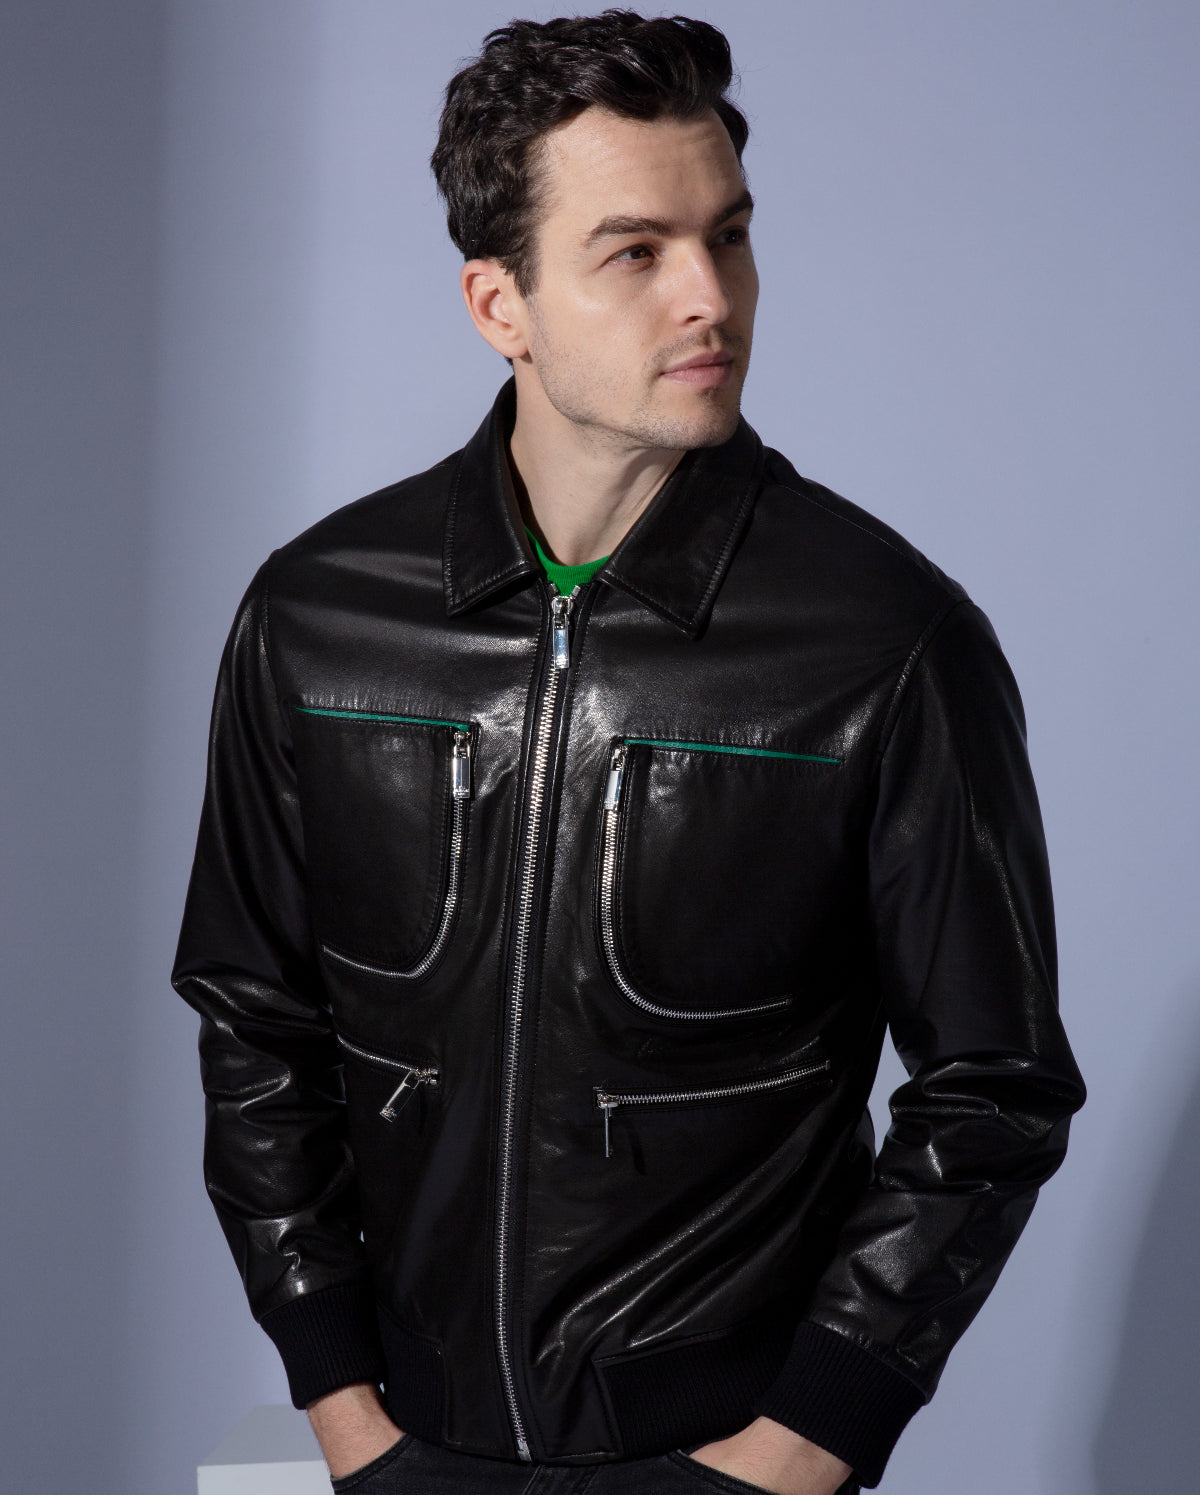 Men's Black Leather Jacket | Leather Coat With Fur Collar for Mens